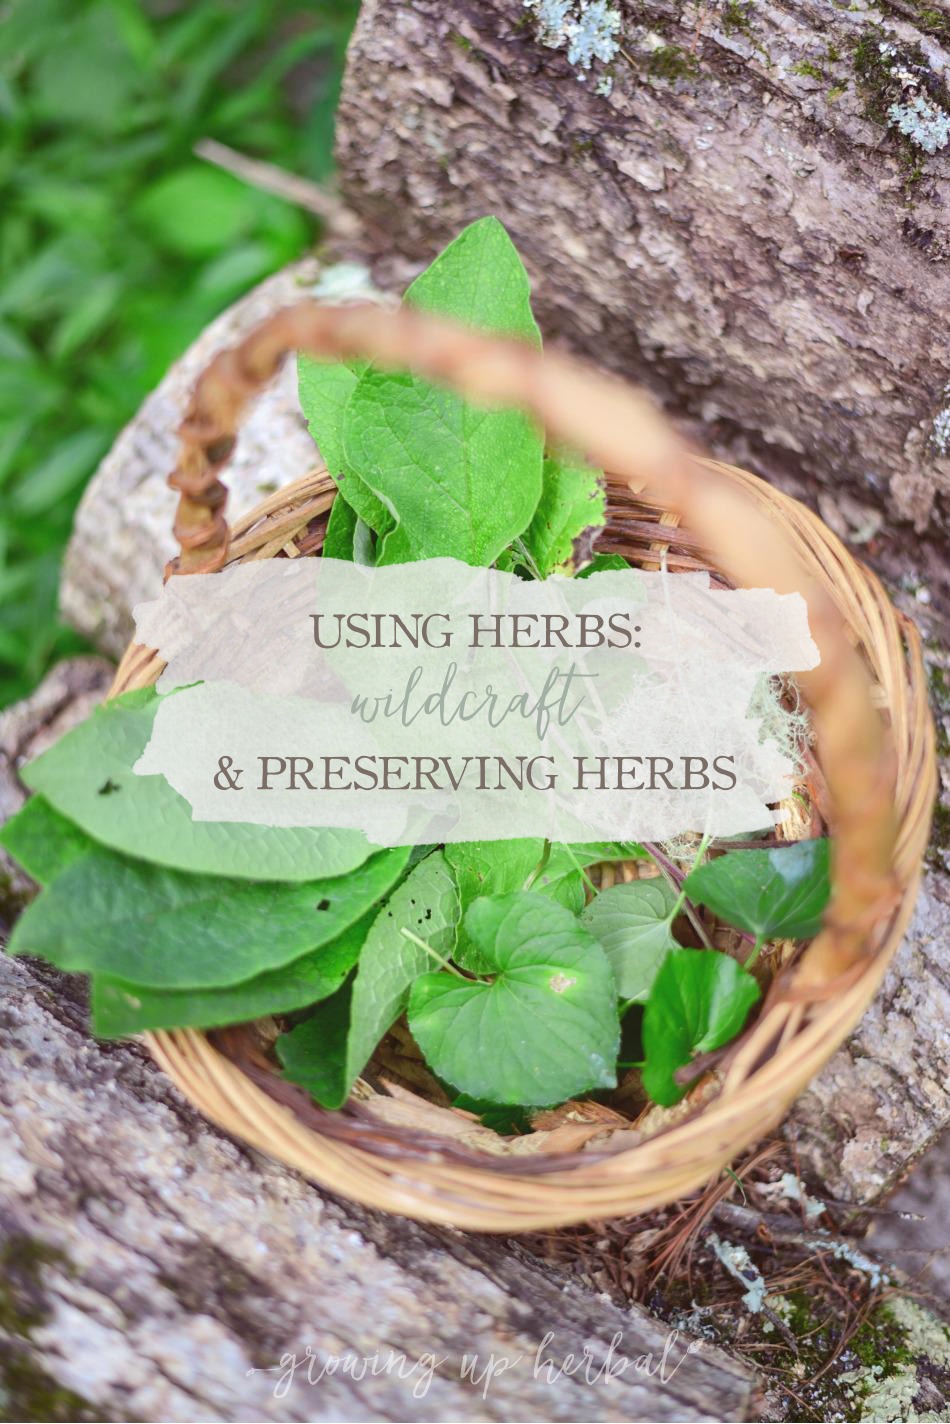 Wildcrafting & Preserving Herbs | GrowingUpHerbal.com | Learn how to forage and preserve your own herbs from the wild.